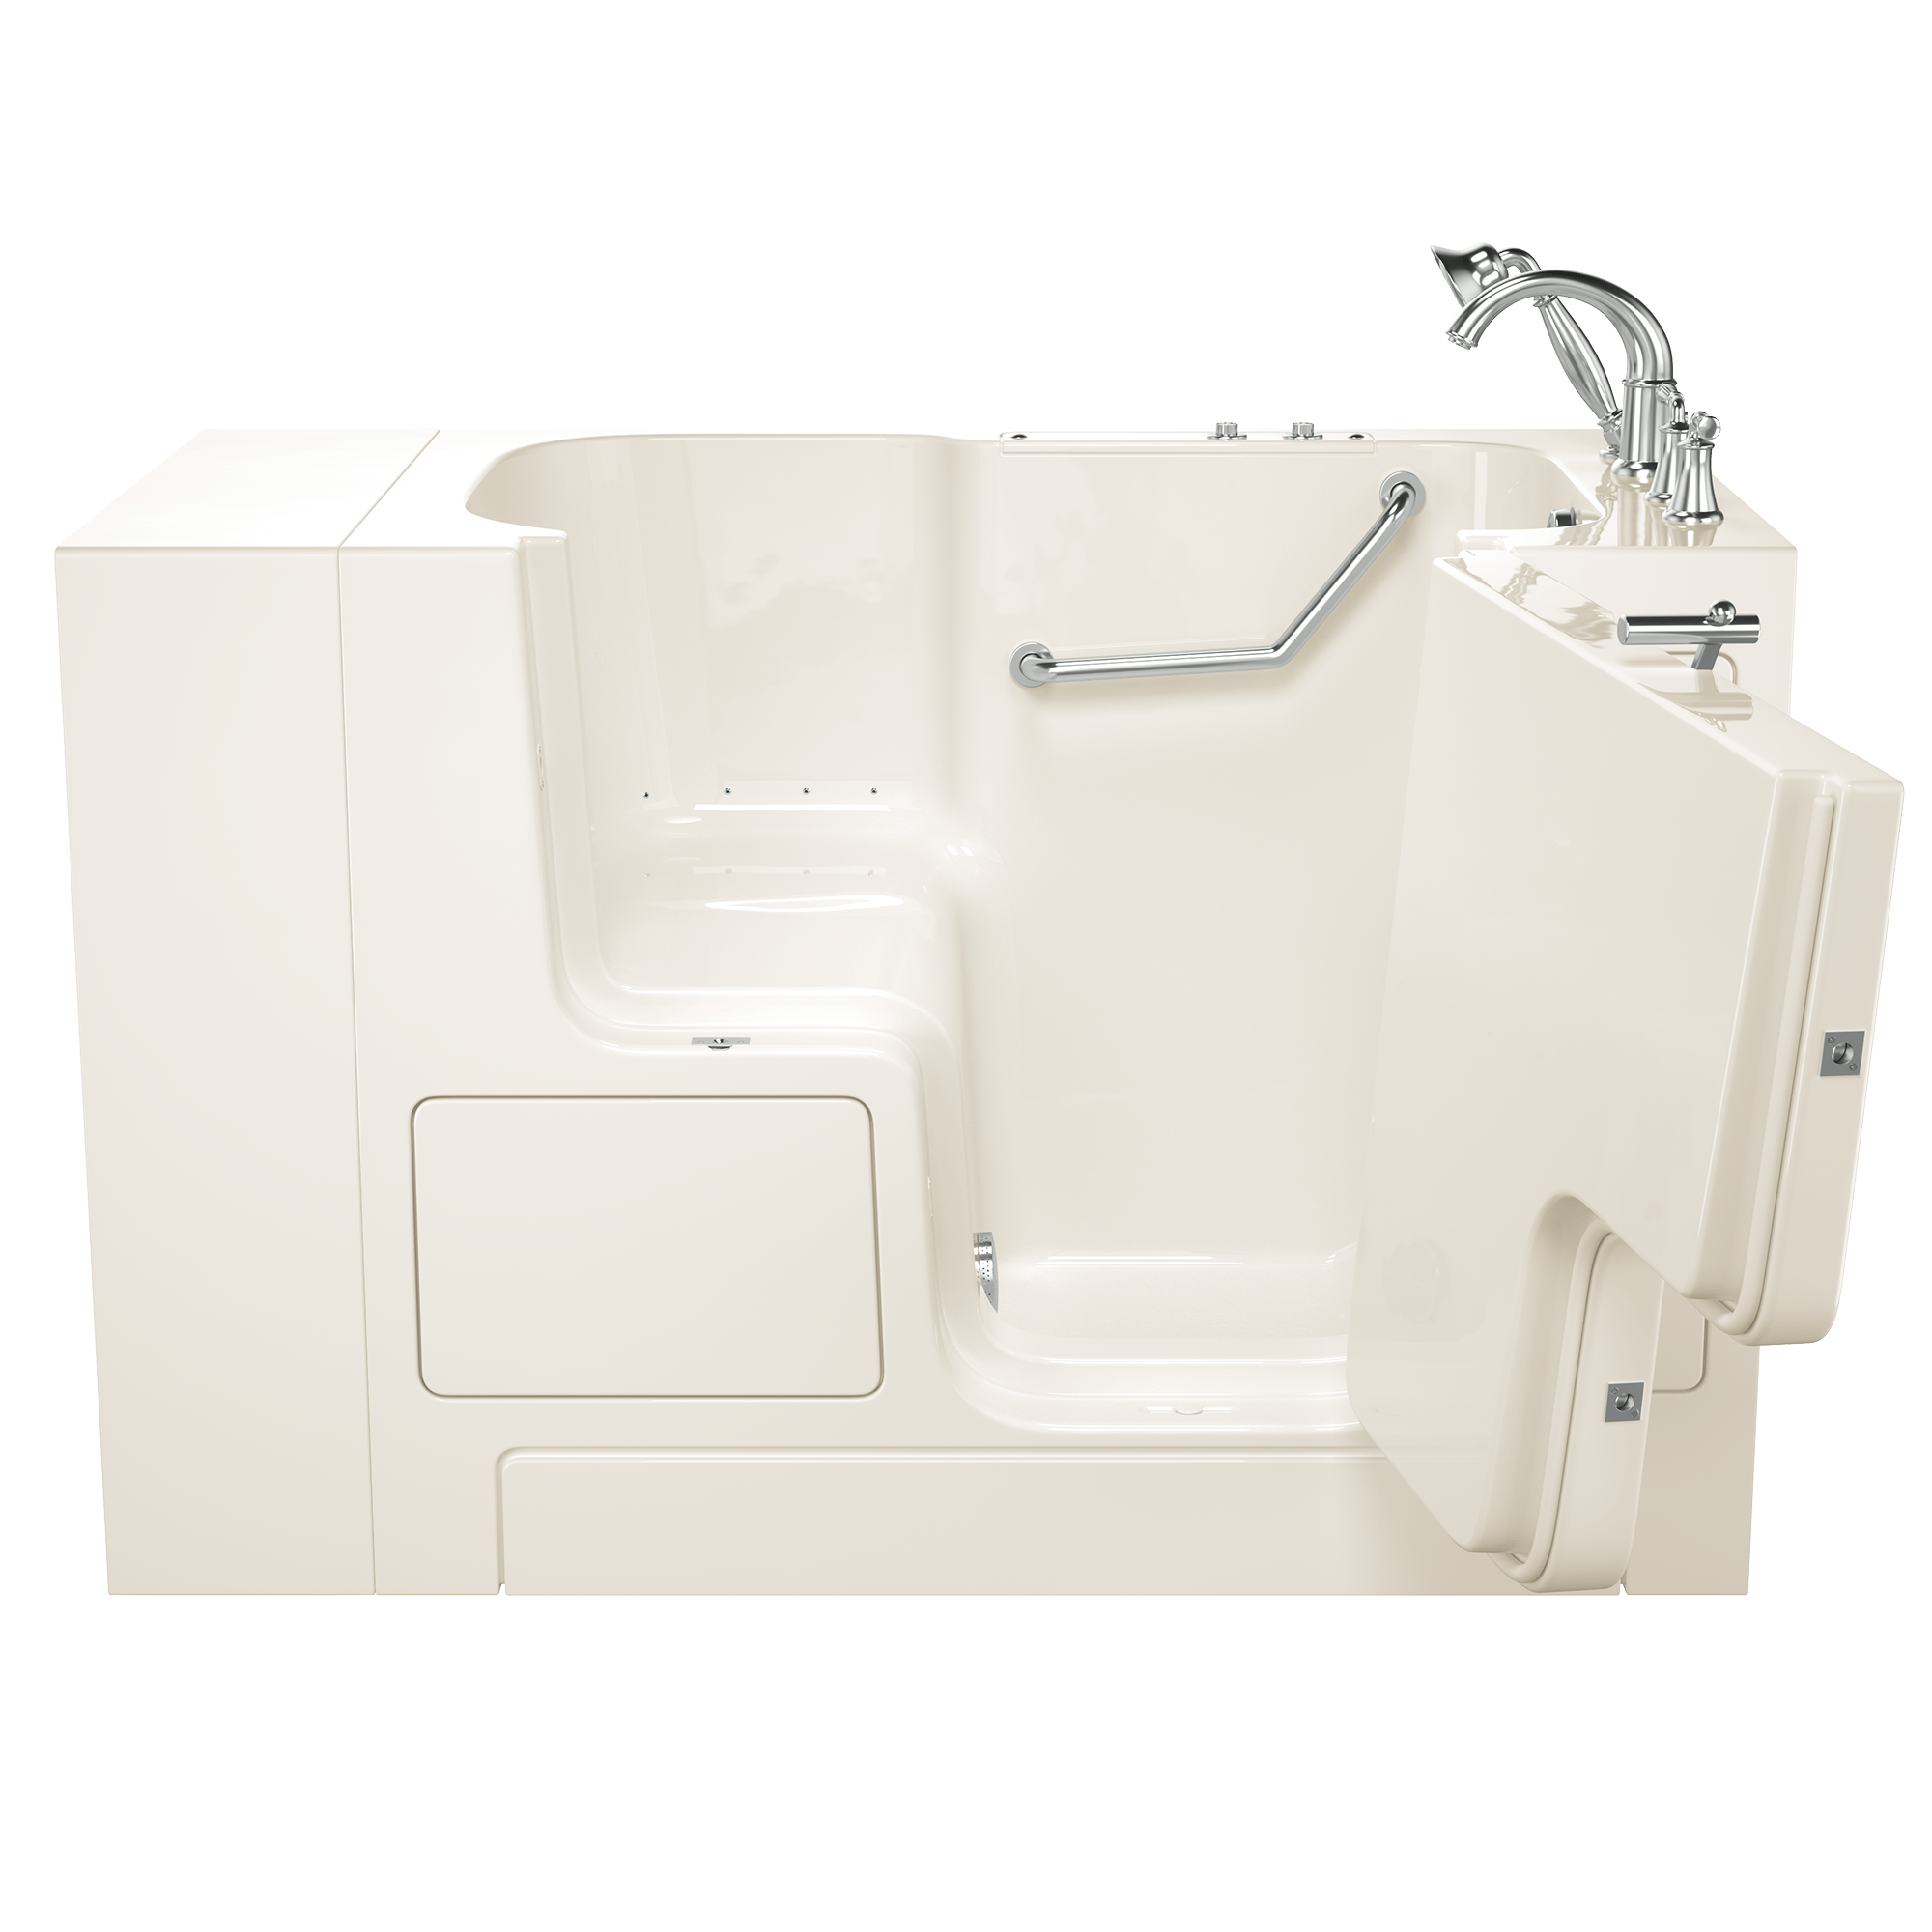 Gelcoat Value Series 32 x 52 -Inch Walk-in Tub With Air Spa System - Right-Hand Drain With Faucet